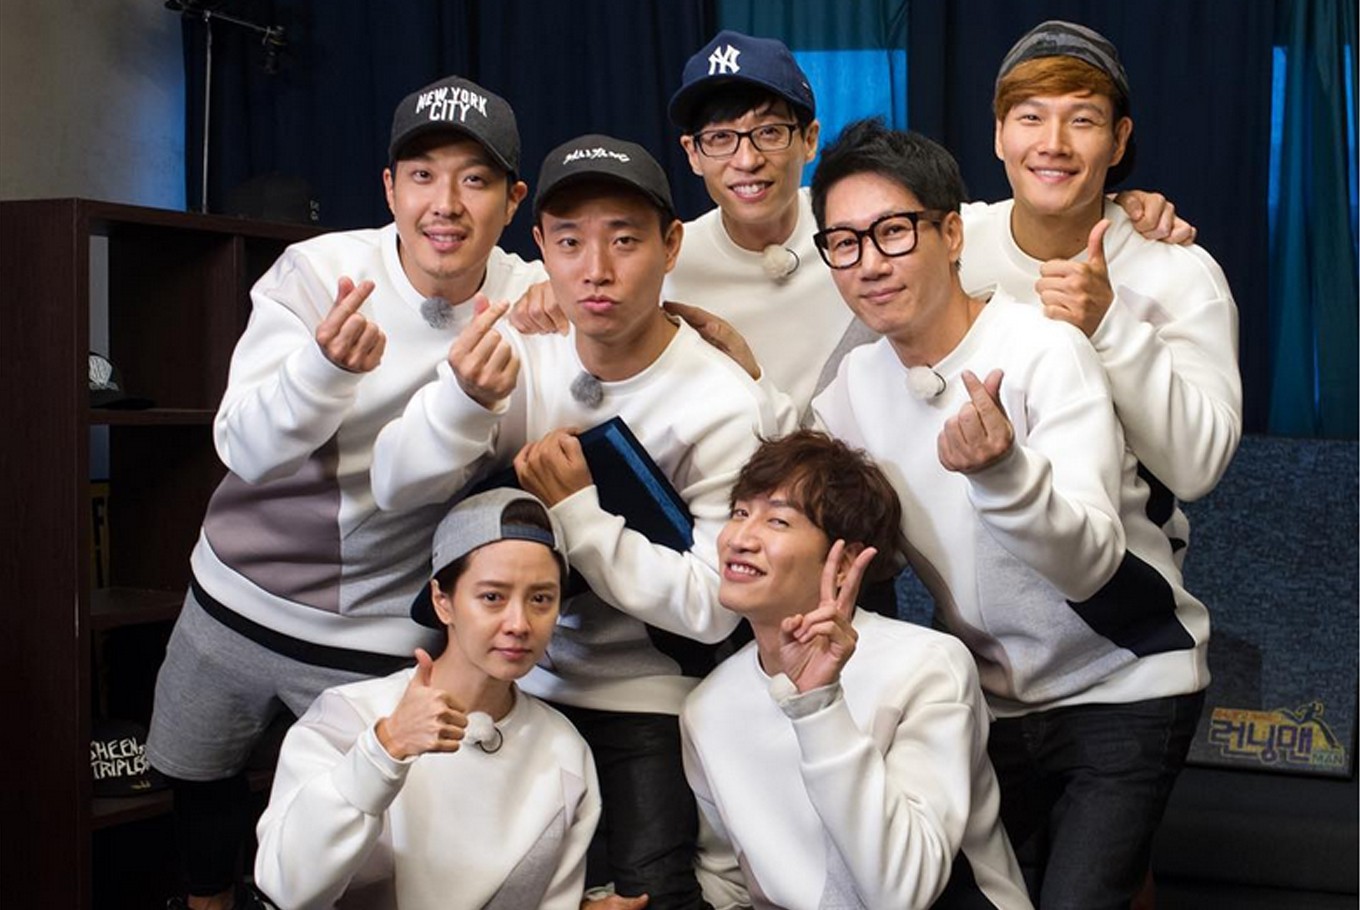 Revisiting most-watched episodes of âRunning Manâ